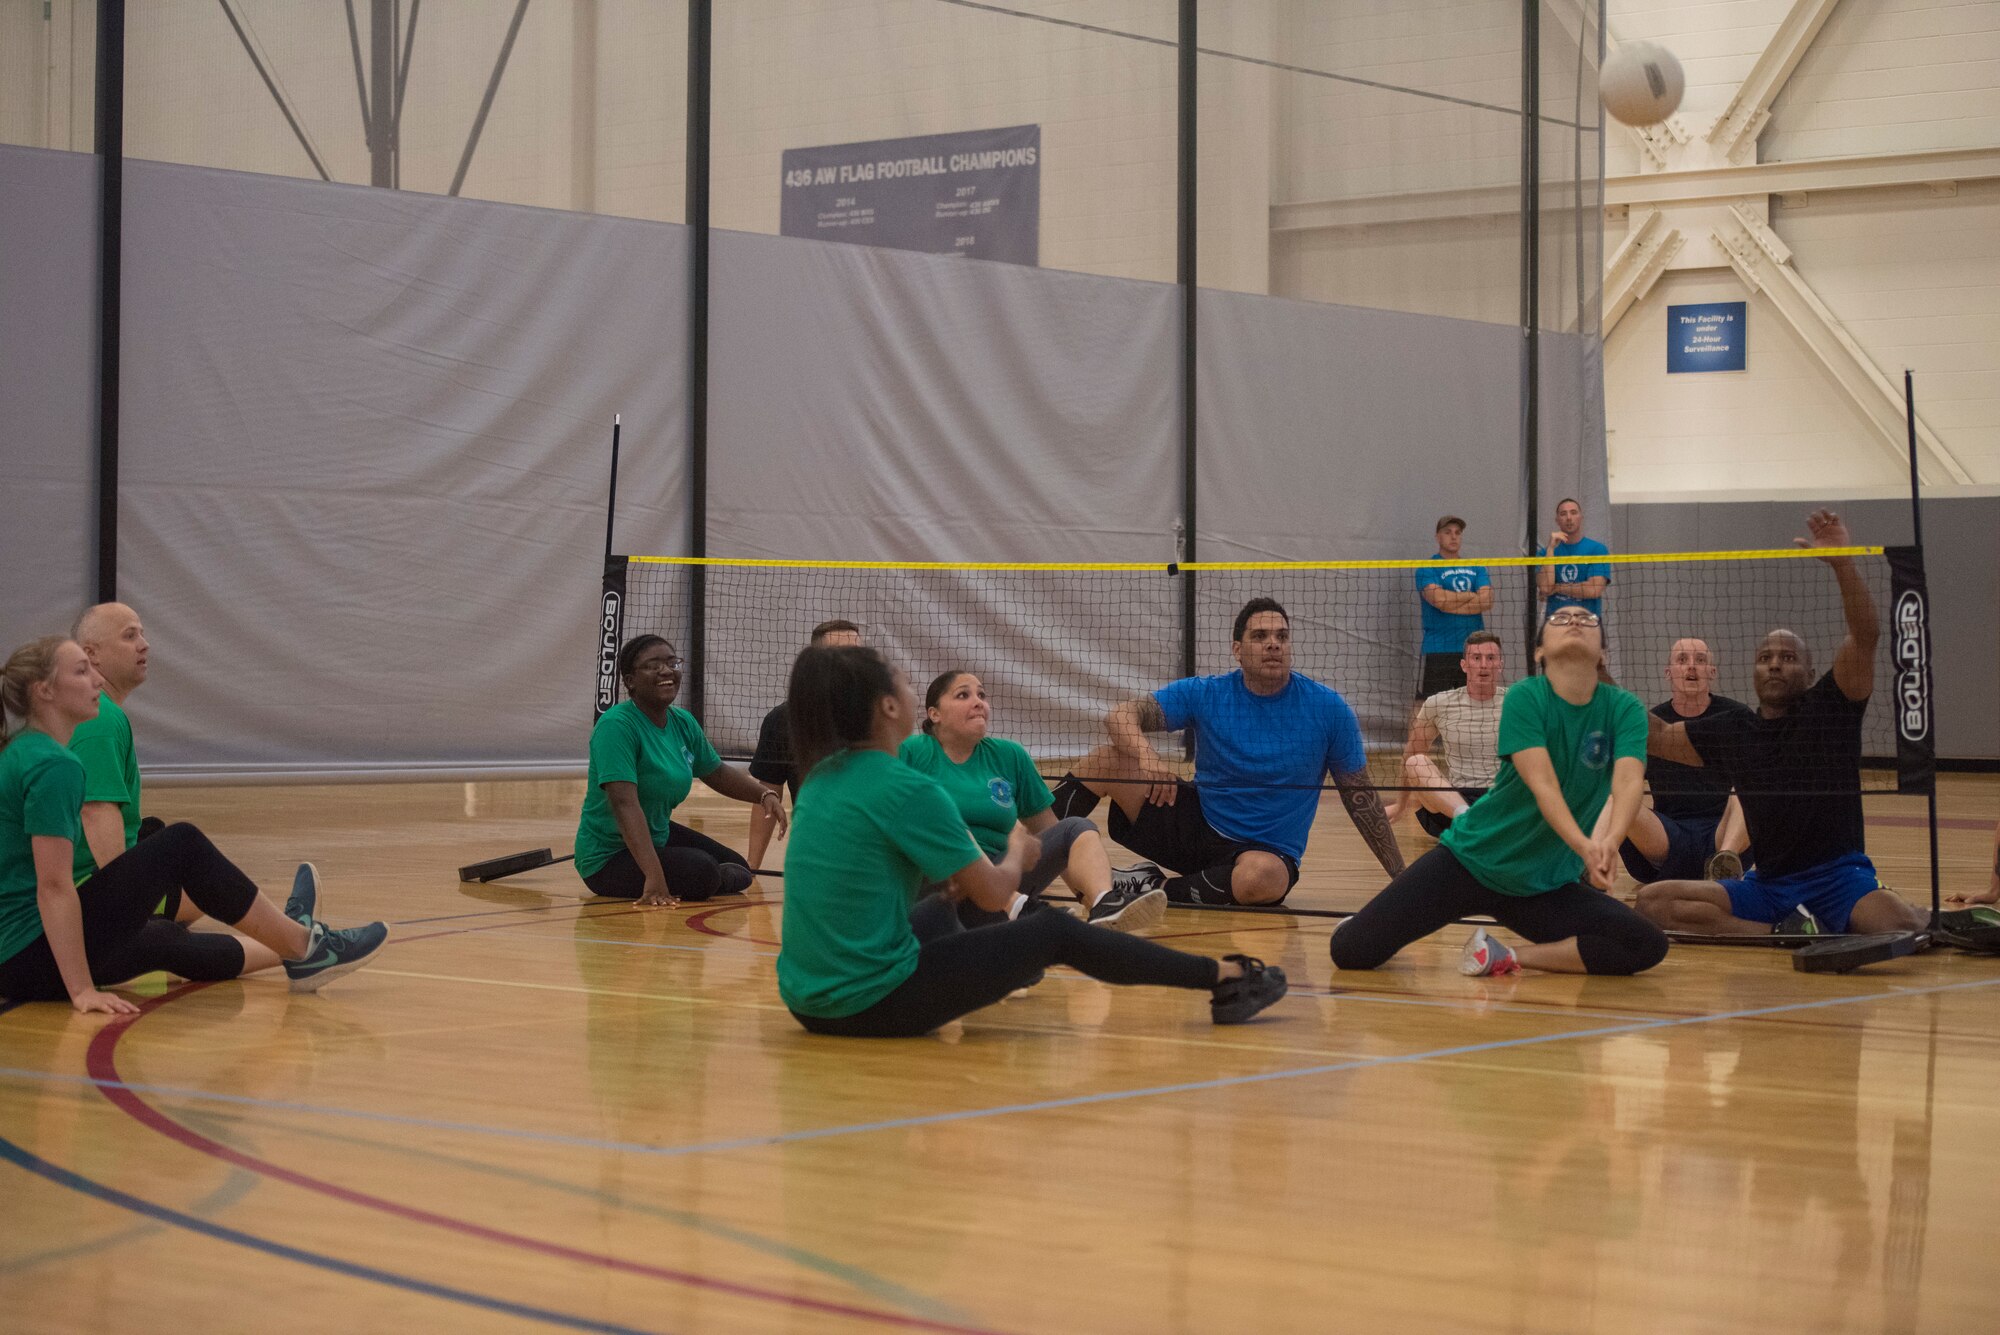 An airman from the 436th Comptroller Squadron prepares to hit the volleyball June 14, 2019 at Dover Air Force Base, Del. Within the limited space the players are not allowed to stand up but can get on their knees to hit the ball. (U.S. Air Force photo by A1C Jonathan Harding)